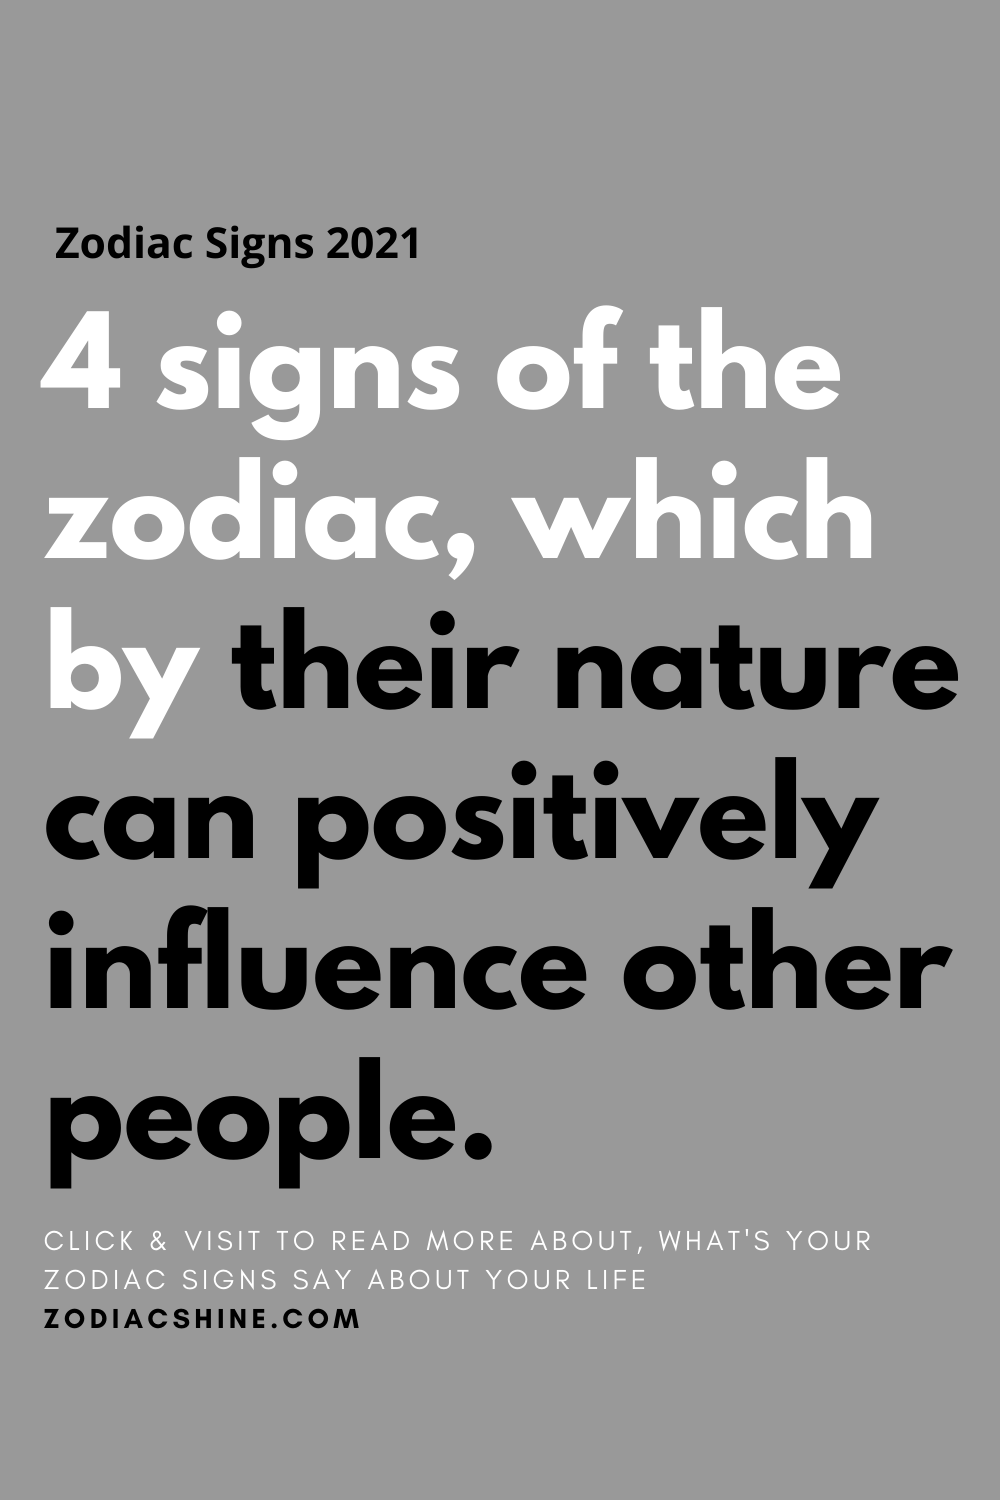 4 signs of the zodiac, which by their nature can positively influence other people.